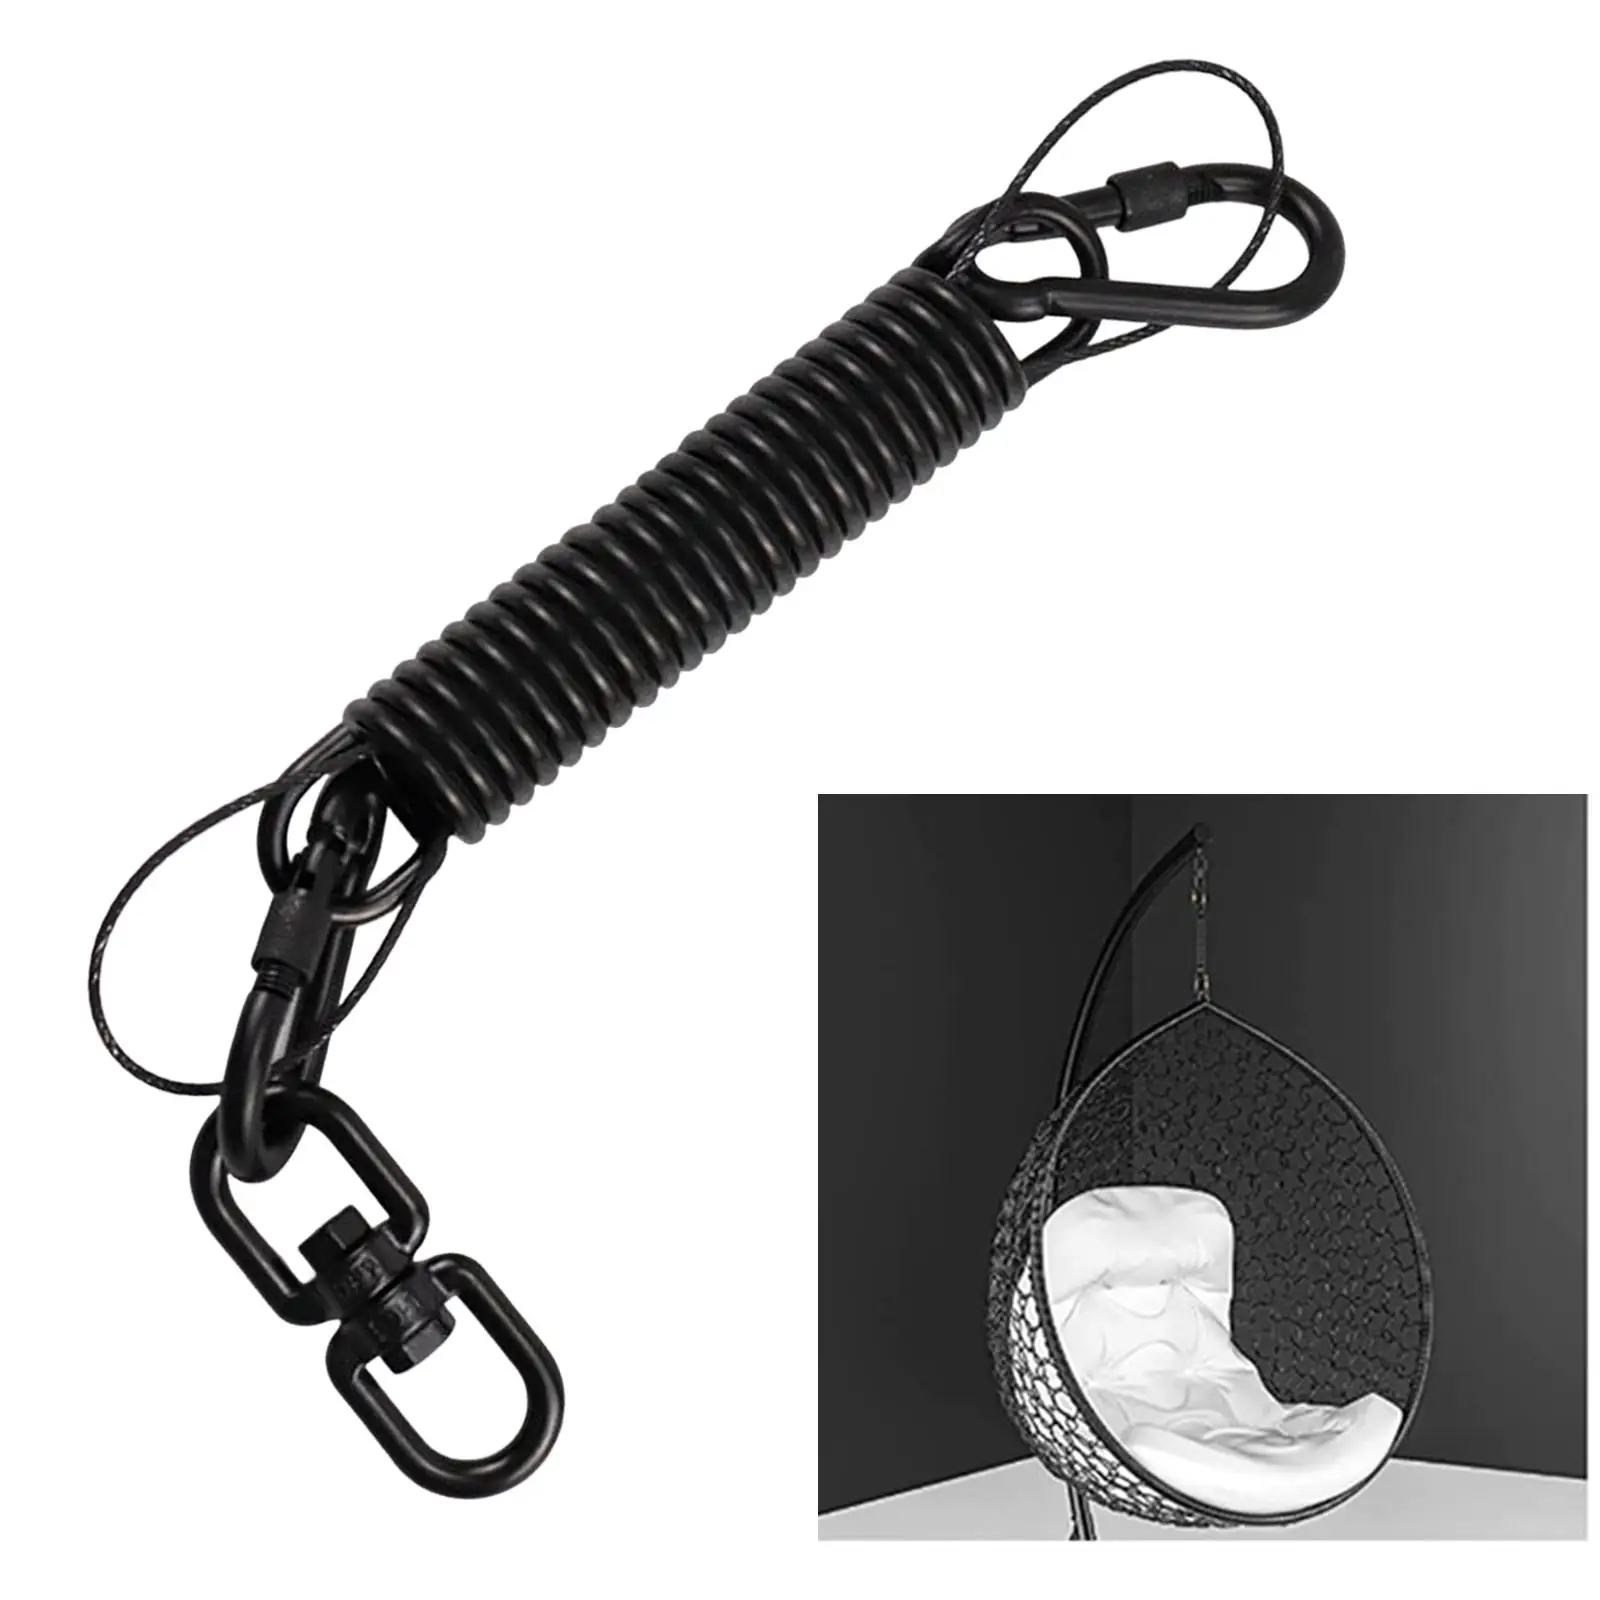 Heavy Duty Swing Spring, Durable Shock Absorbing with , Hammock Spring for Hanging Chair Garden Heavy Bag, Outdoor